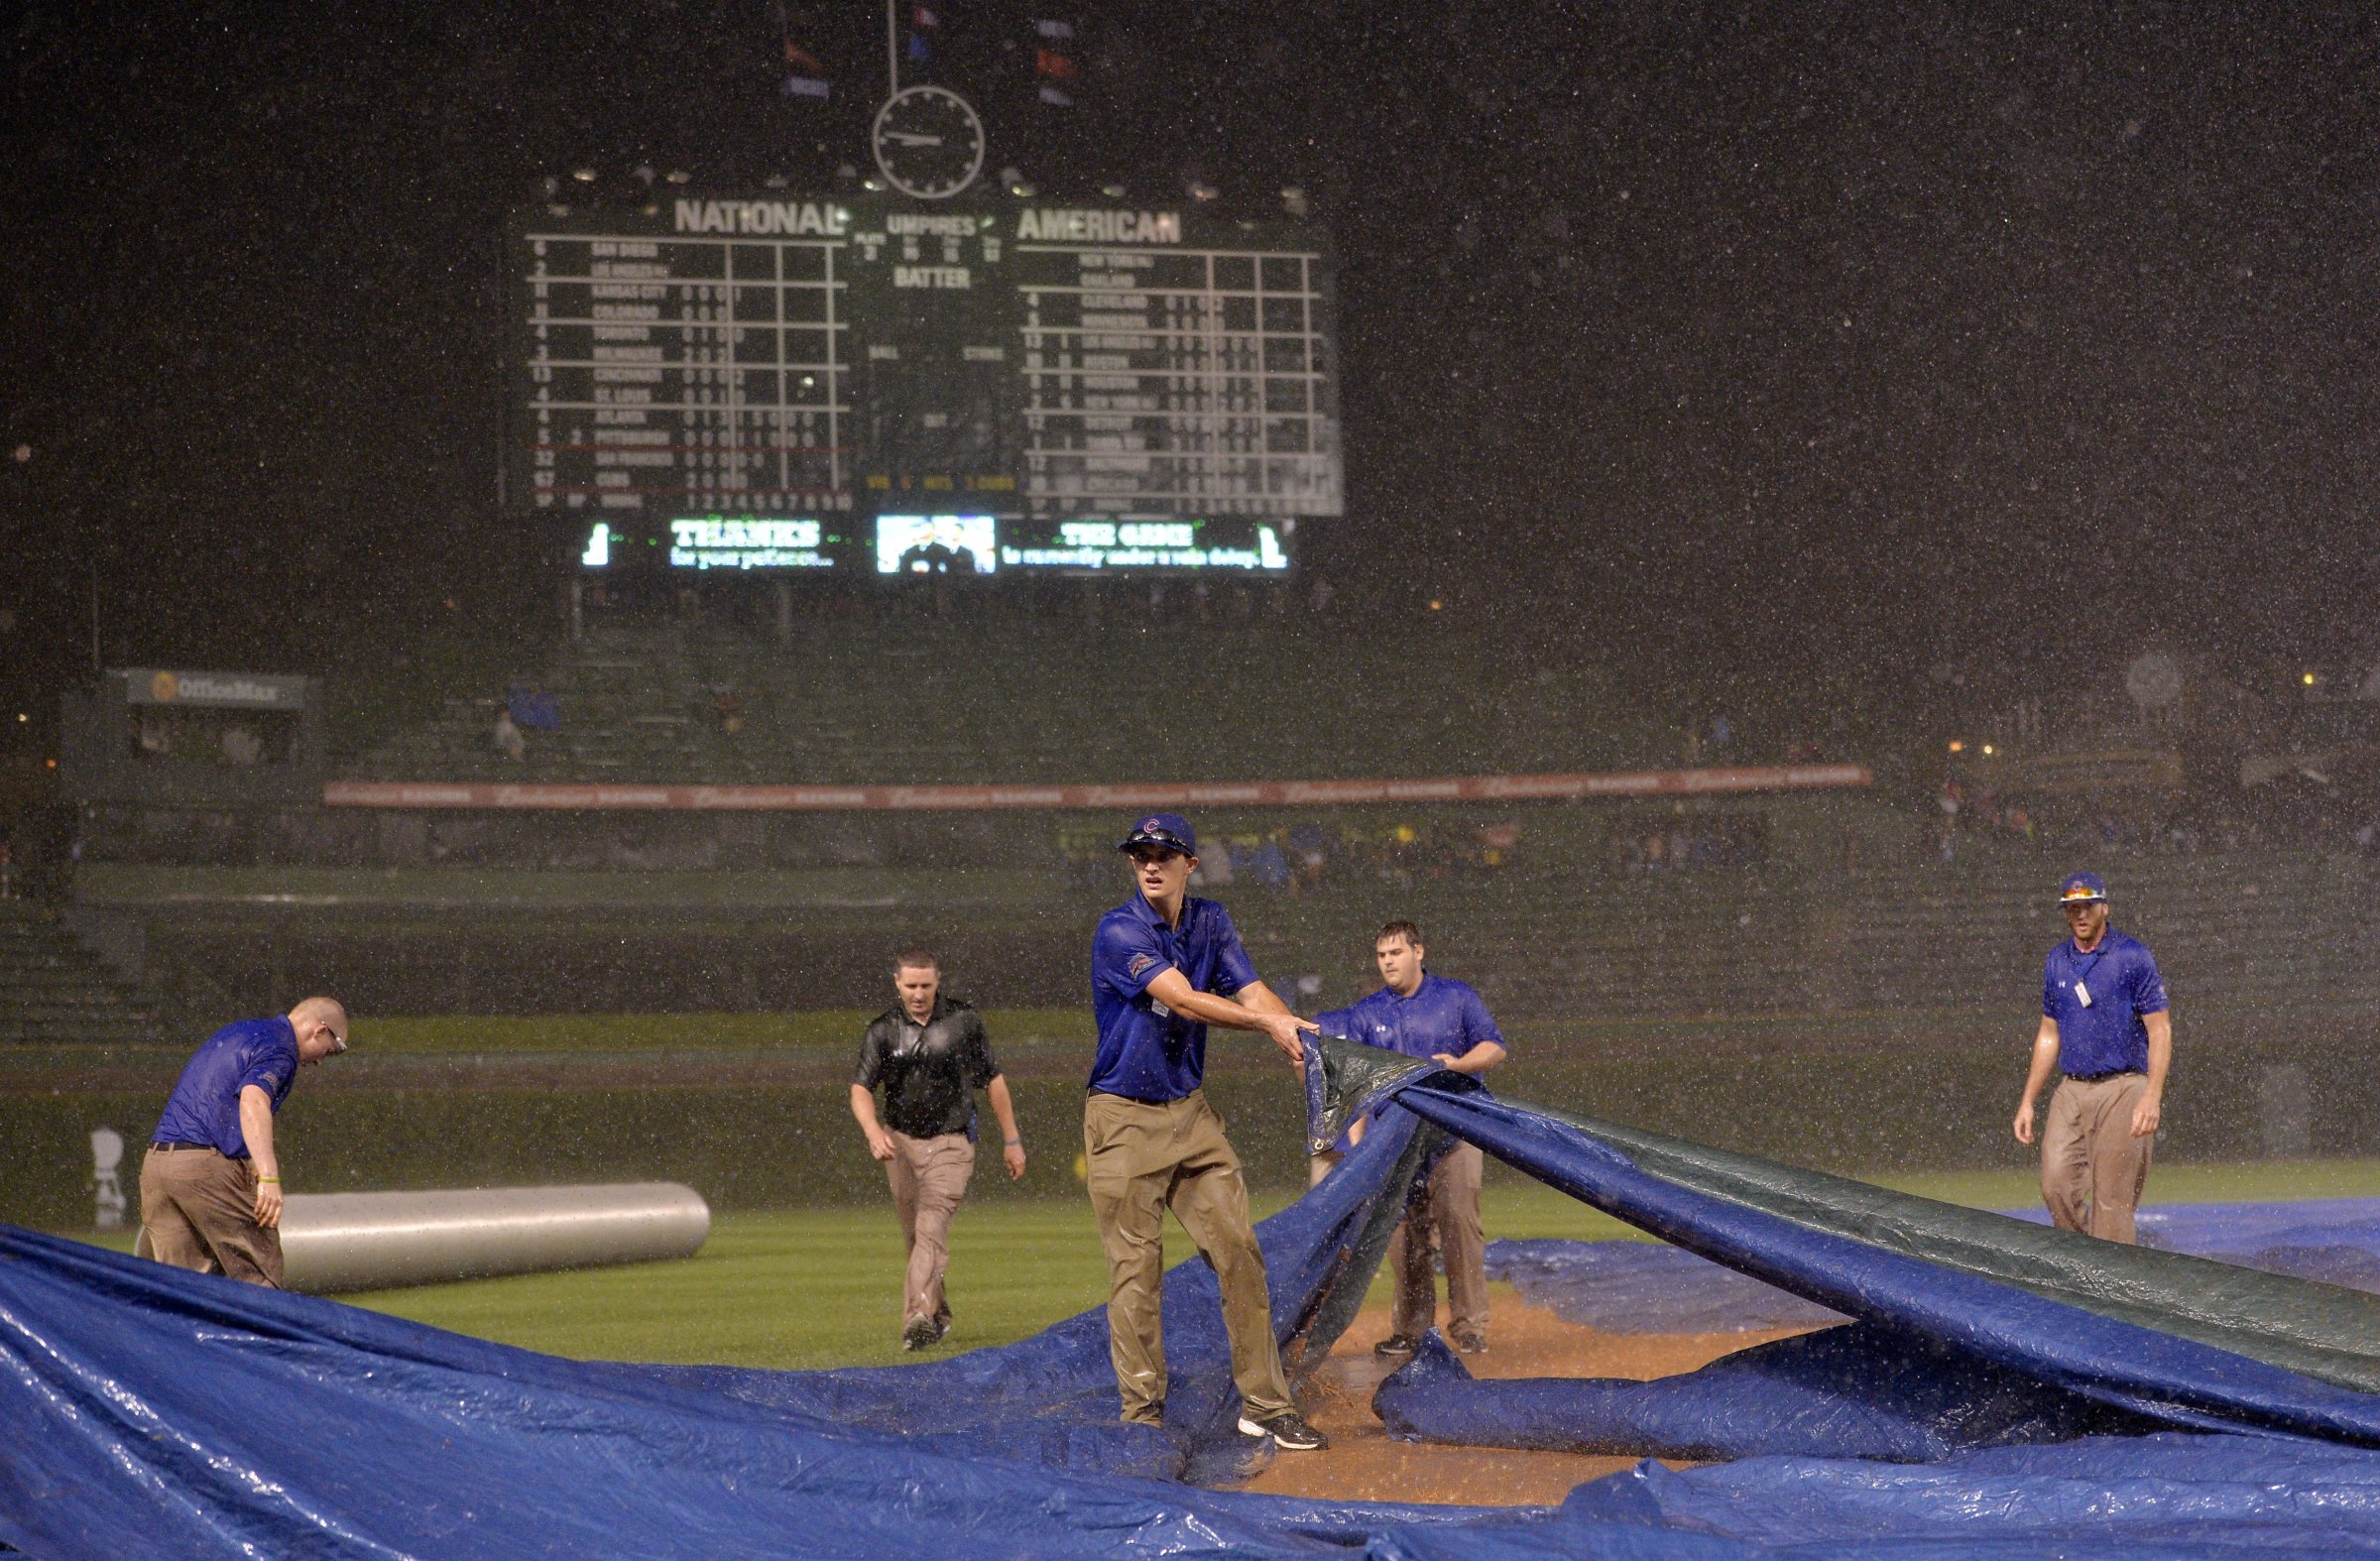 Chicago Cubs ground crew members struggle to get the tarp on the field as rain falls during the fifth inning of the Chicago Cubs game against the San Francisco Giants at Wrigley Field on August 19, 2014 in Chicago.